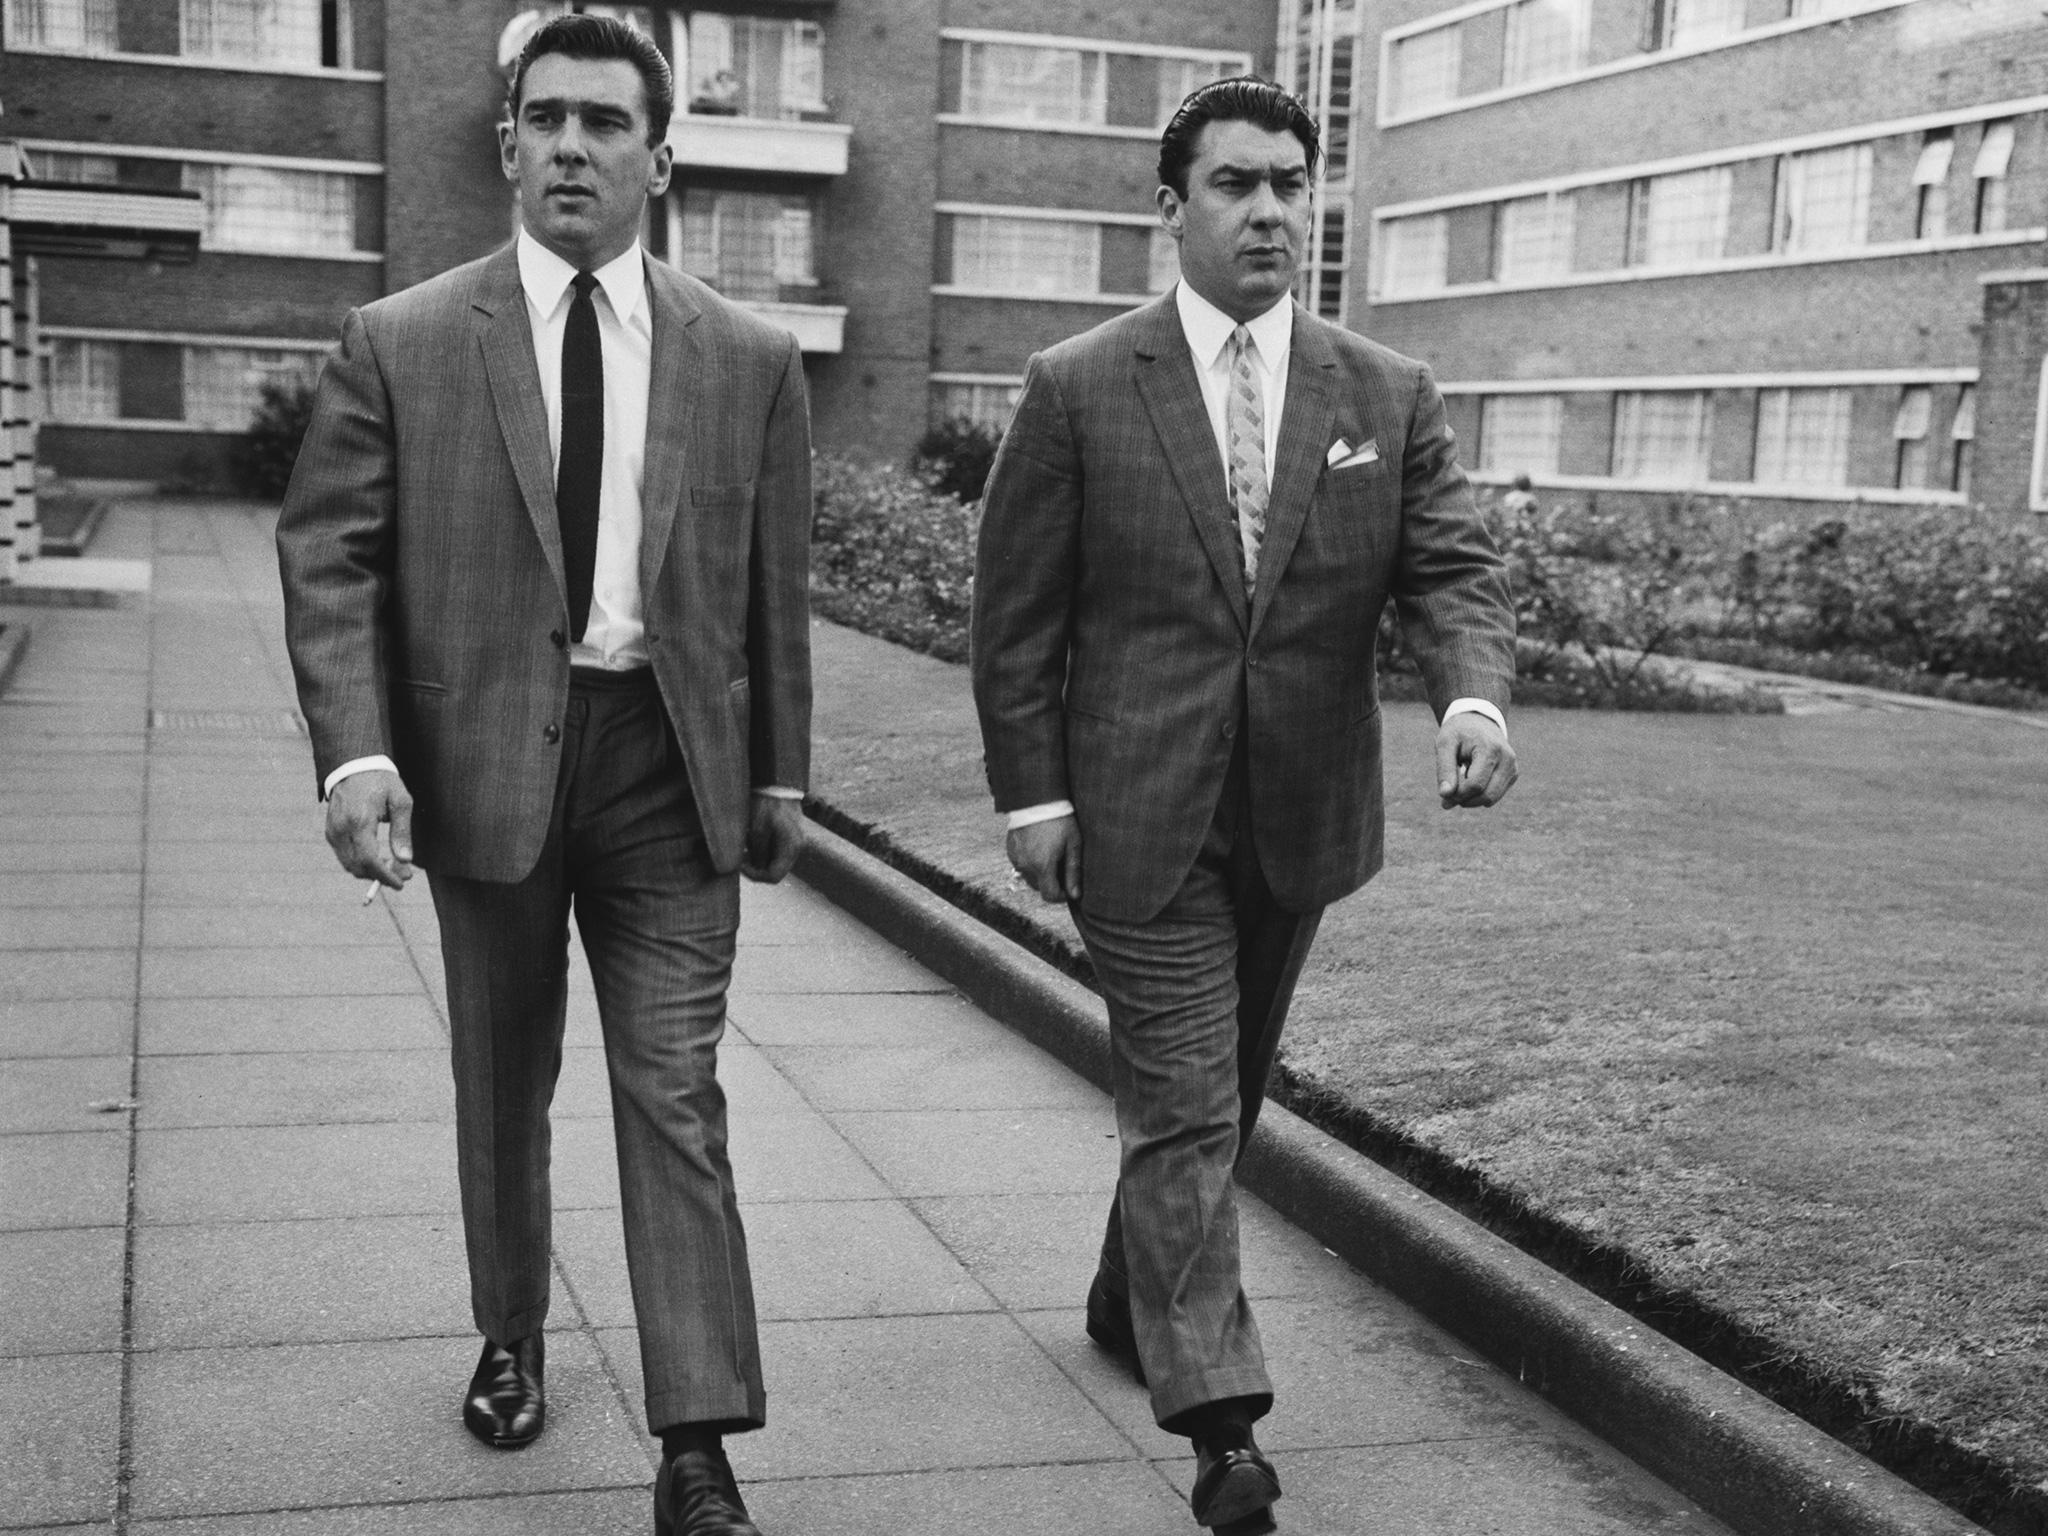 Legend: An in-depth look into the violent history of Ronnie and